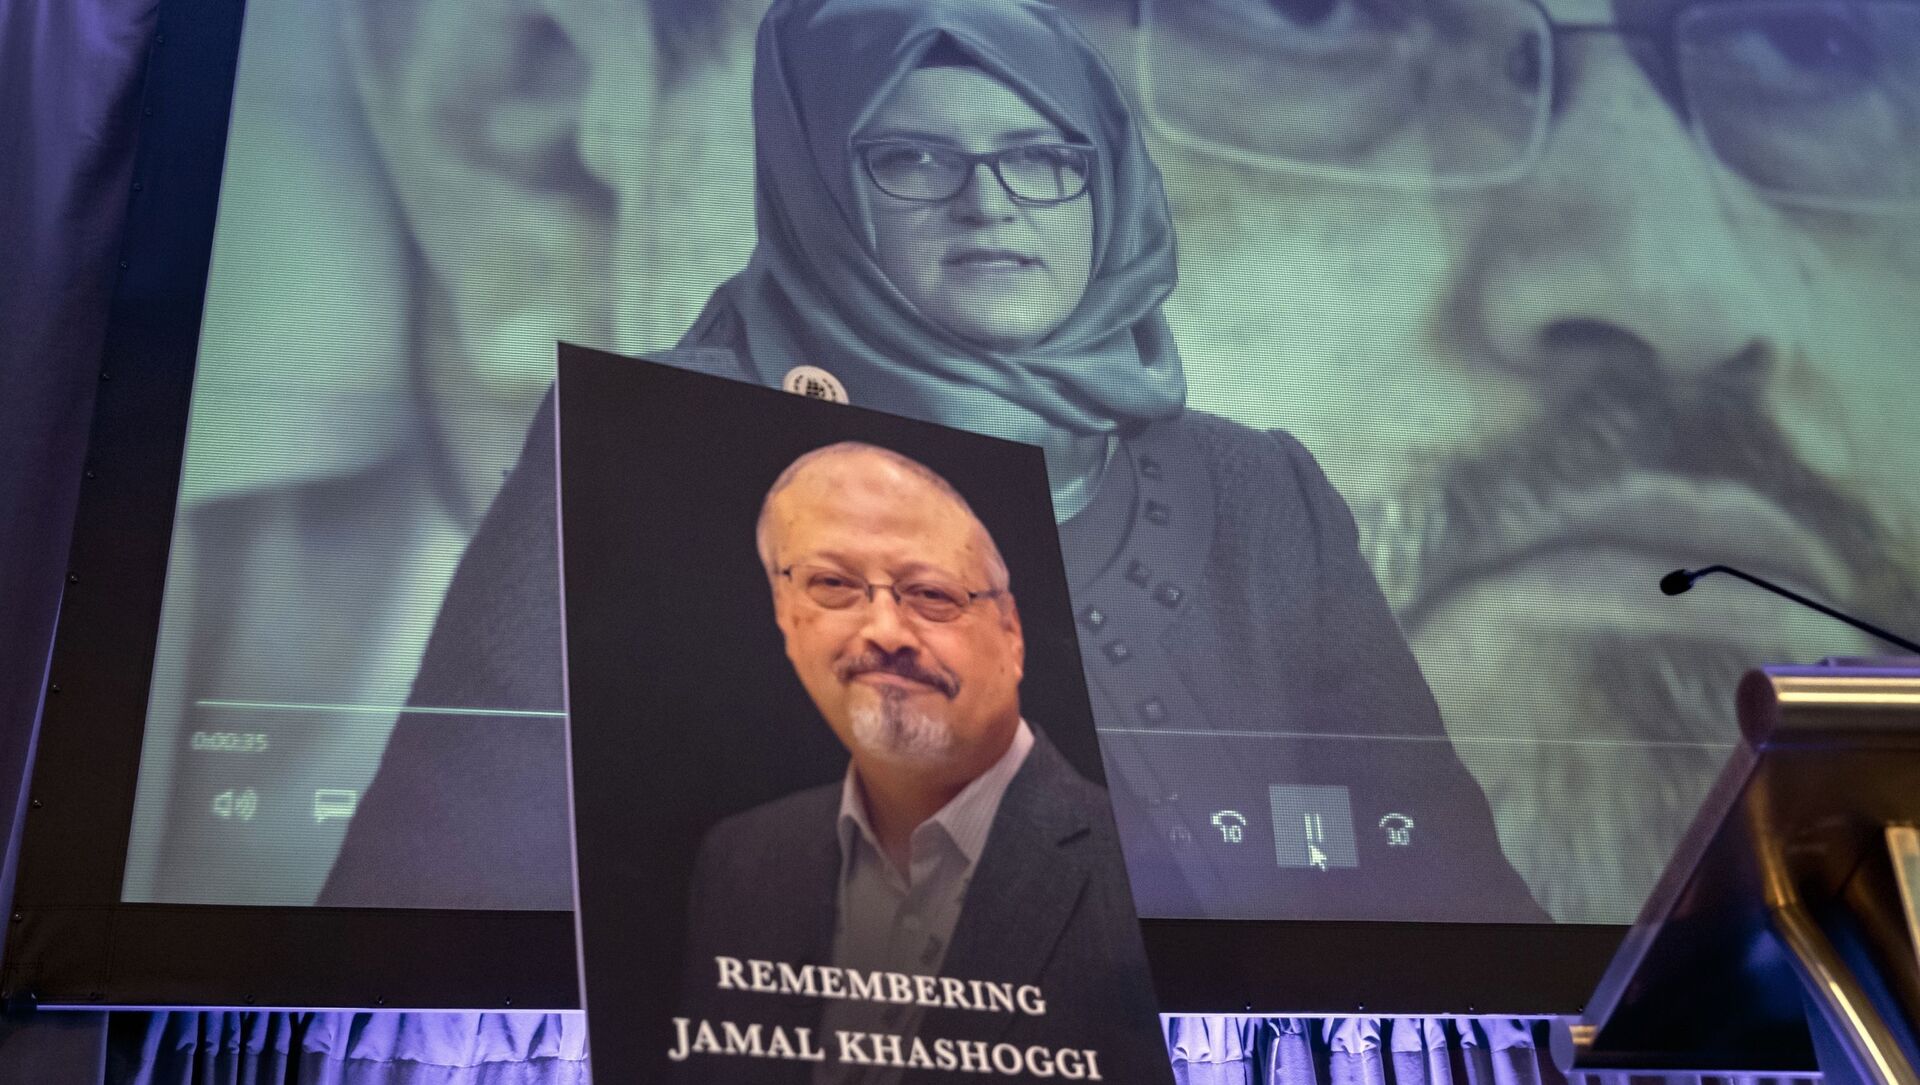 FILE - In this Nov. 2, 2018 file photo, a video image of Hatice Cengiz, fiancee of slain Saudi journalist Jamal Khashoggi, is played during an event to remember Khashoggi, who died inside the Saudi Consulate in Istanbul on Oct. 2, 2018, in Washington - Sputnik International, 1920, 07.07.2021